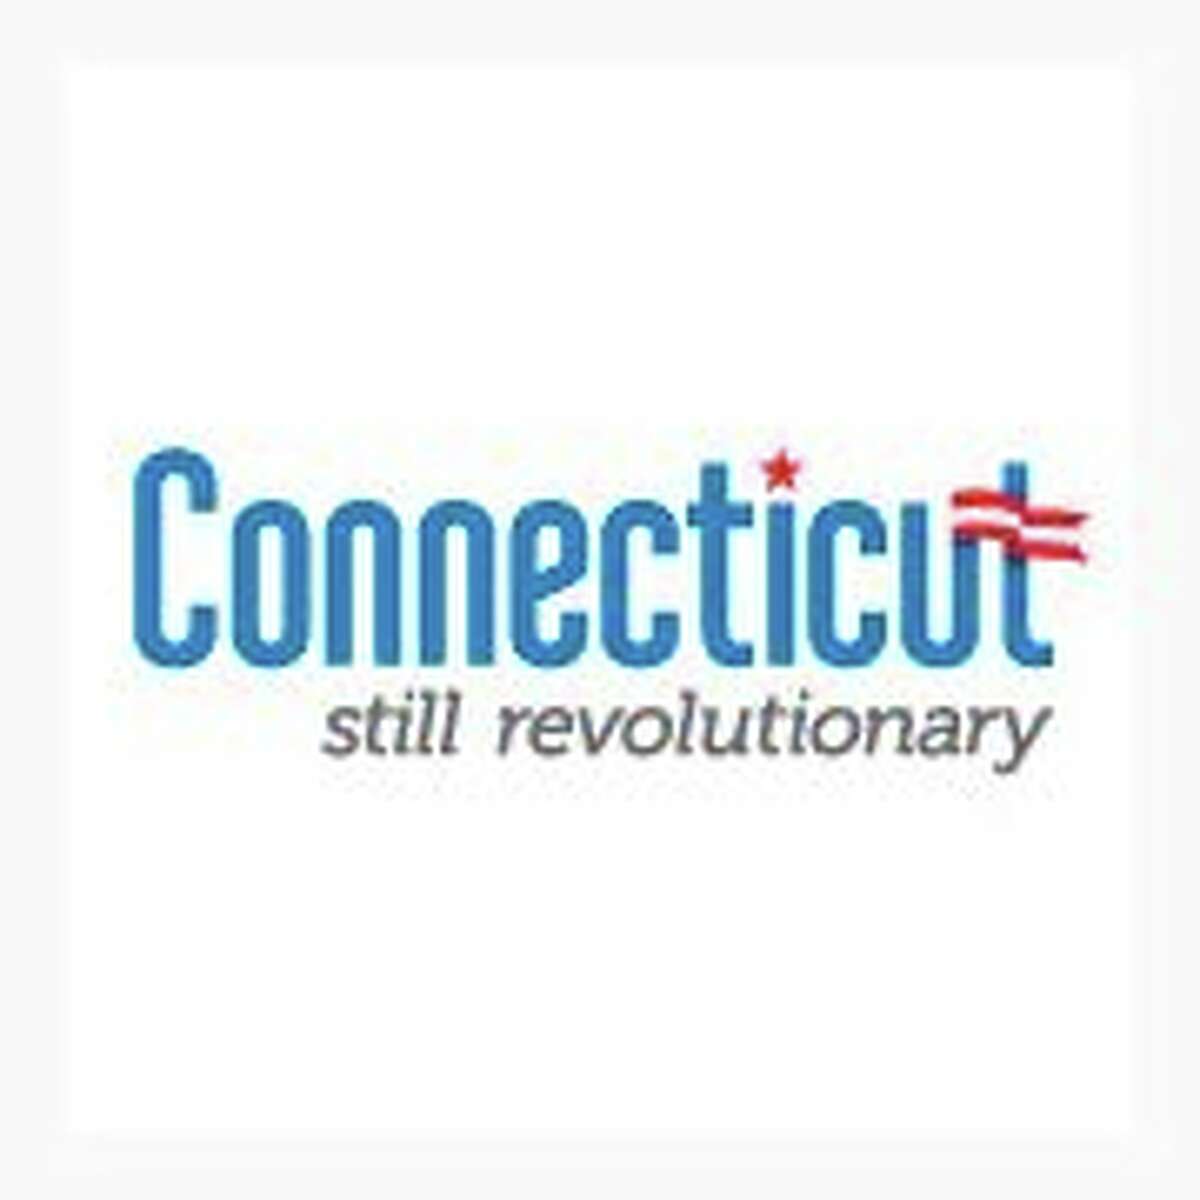 Connecticut released its new tourism logo on Monday, May 14.